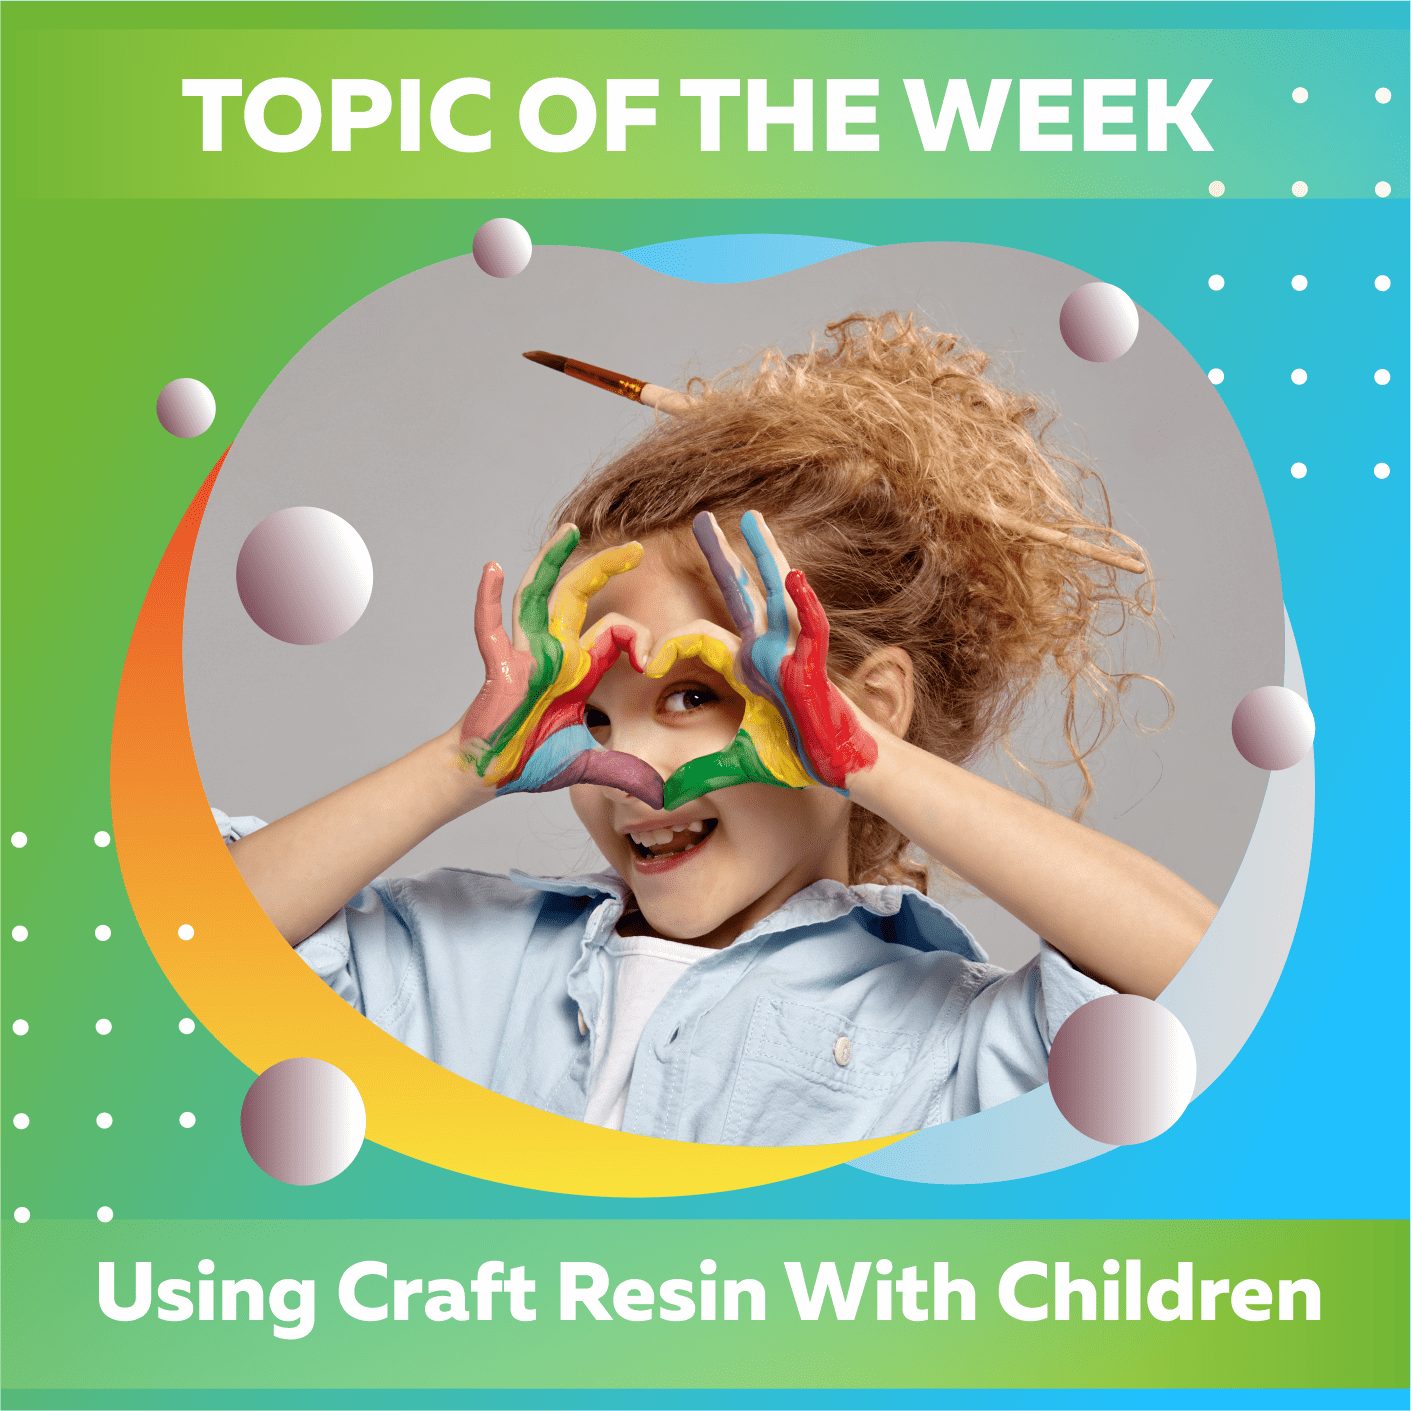 USING CRAFT RESIN WITH CHILDREN